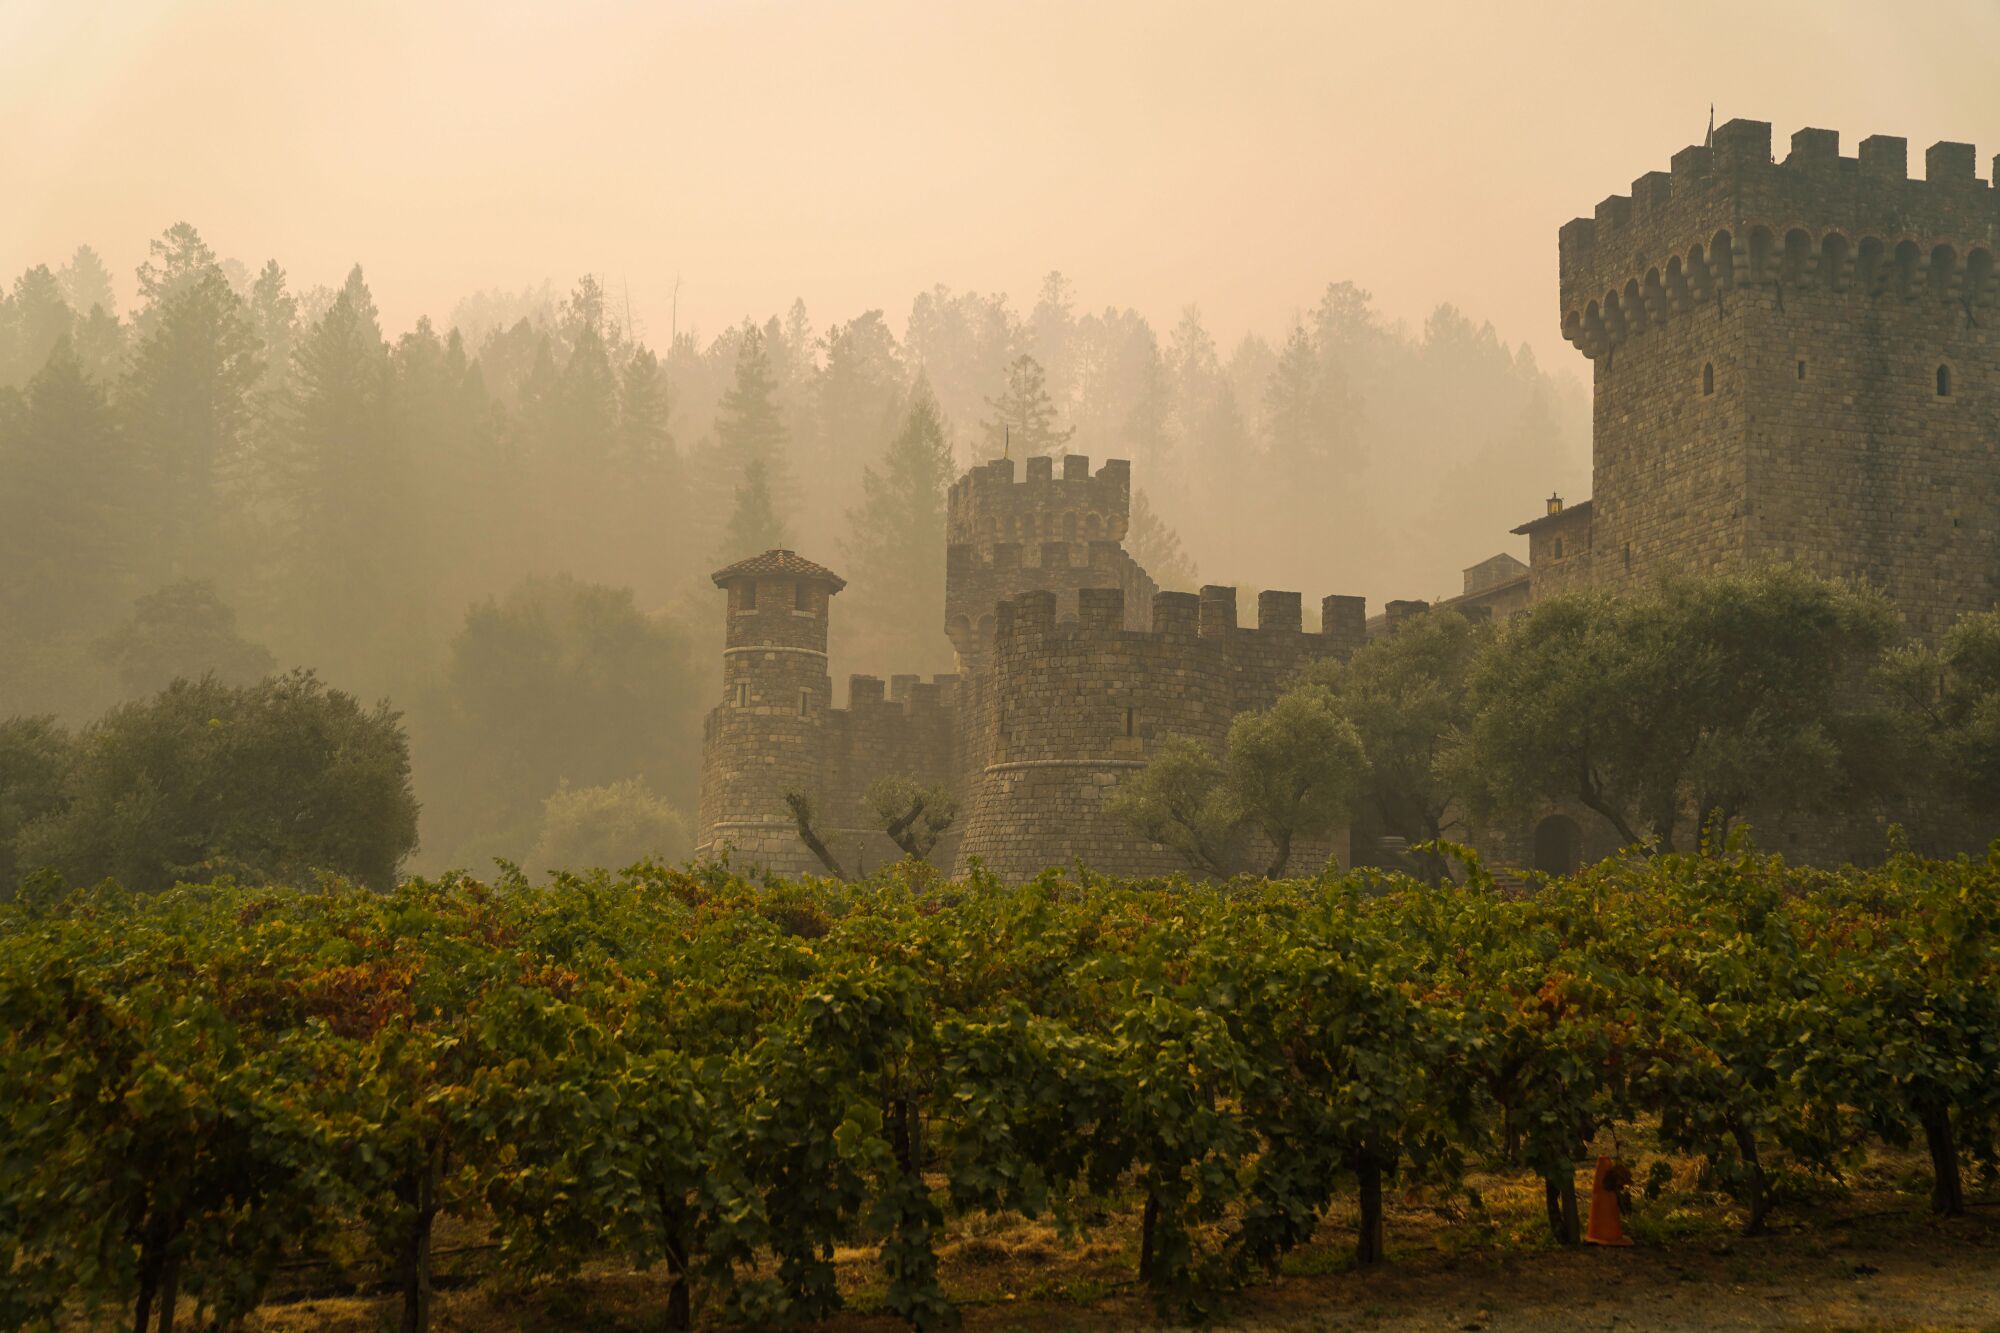 Smoke shrouds the stone buildings and vines at Castello di Amorosa.